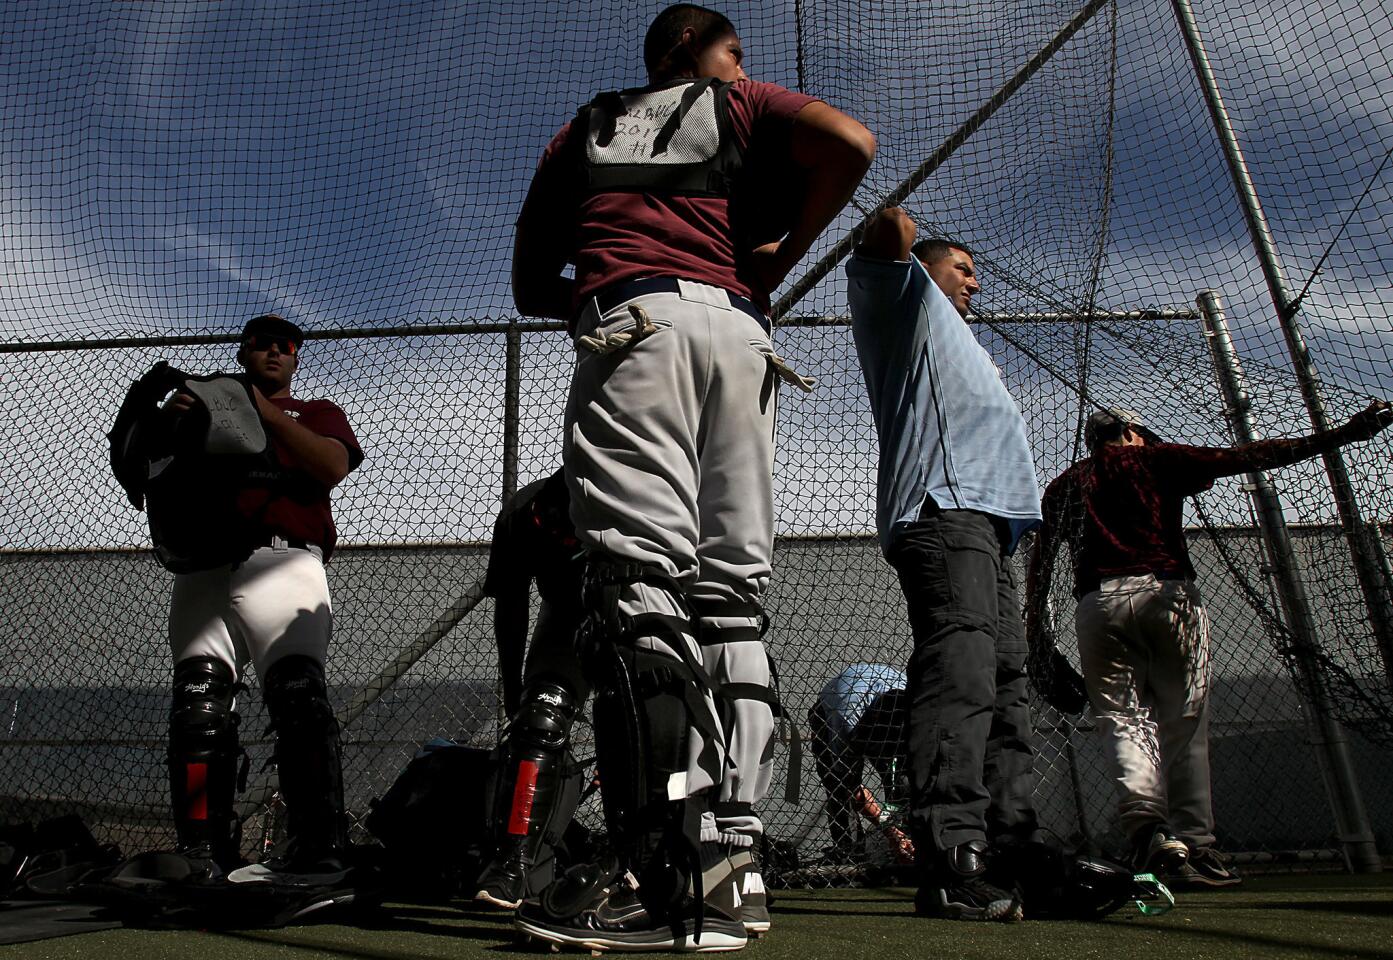 Baseball umpire trainees gear up for an instructional camp session at the batting cages at Compton Community College. The camp is operated by Major League Baseball and serves as a way to find and groom future major league officials.